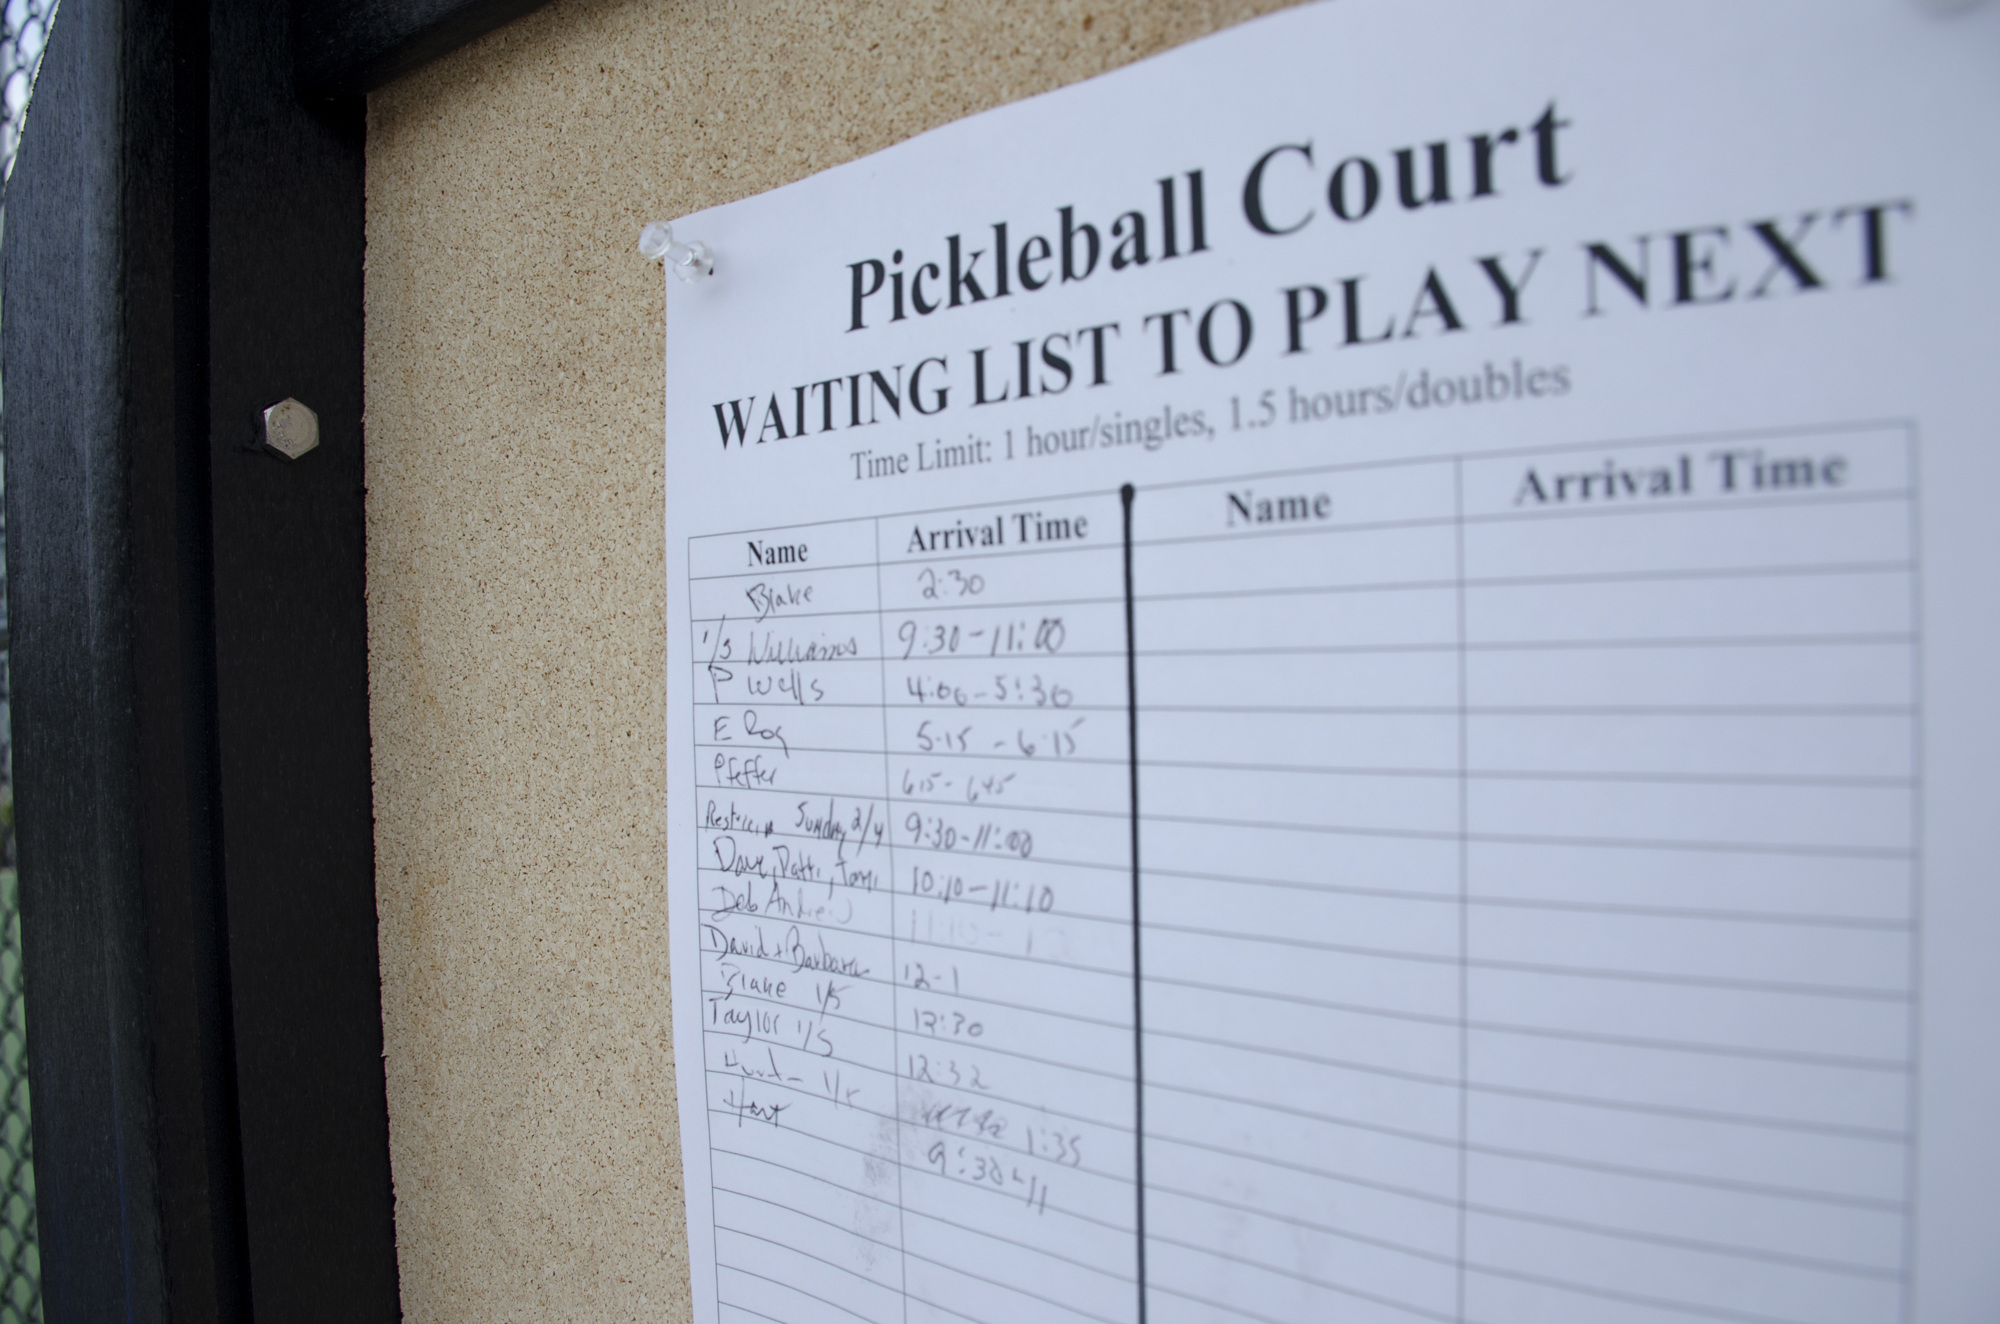 The new sign-in sheet at the Bayfront public pickleball court was designed to curb confusion about reserving court time.